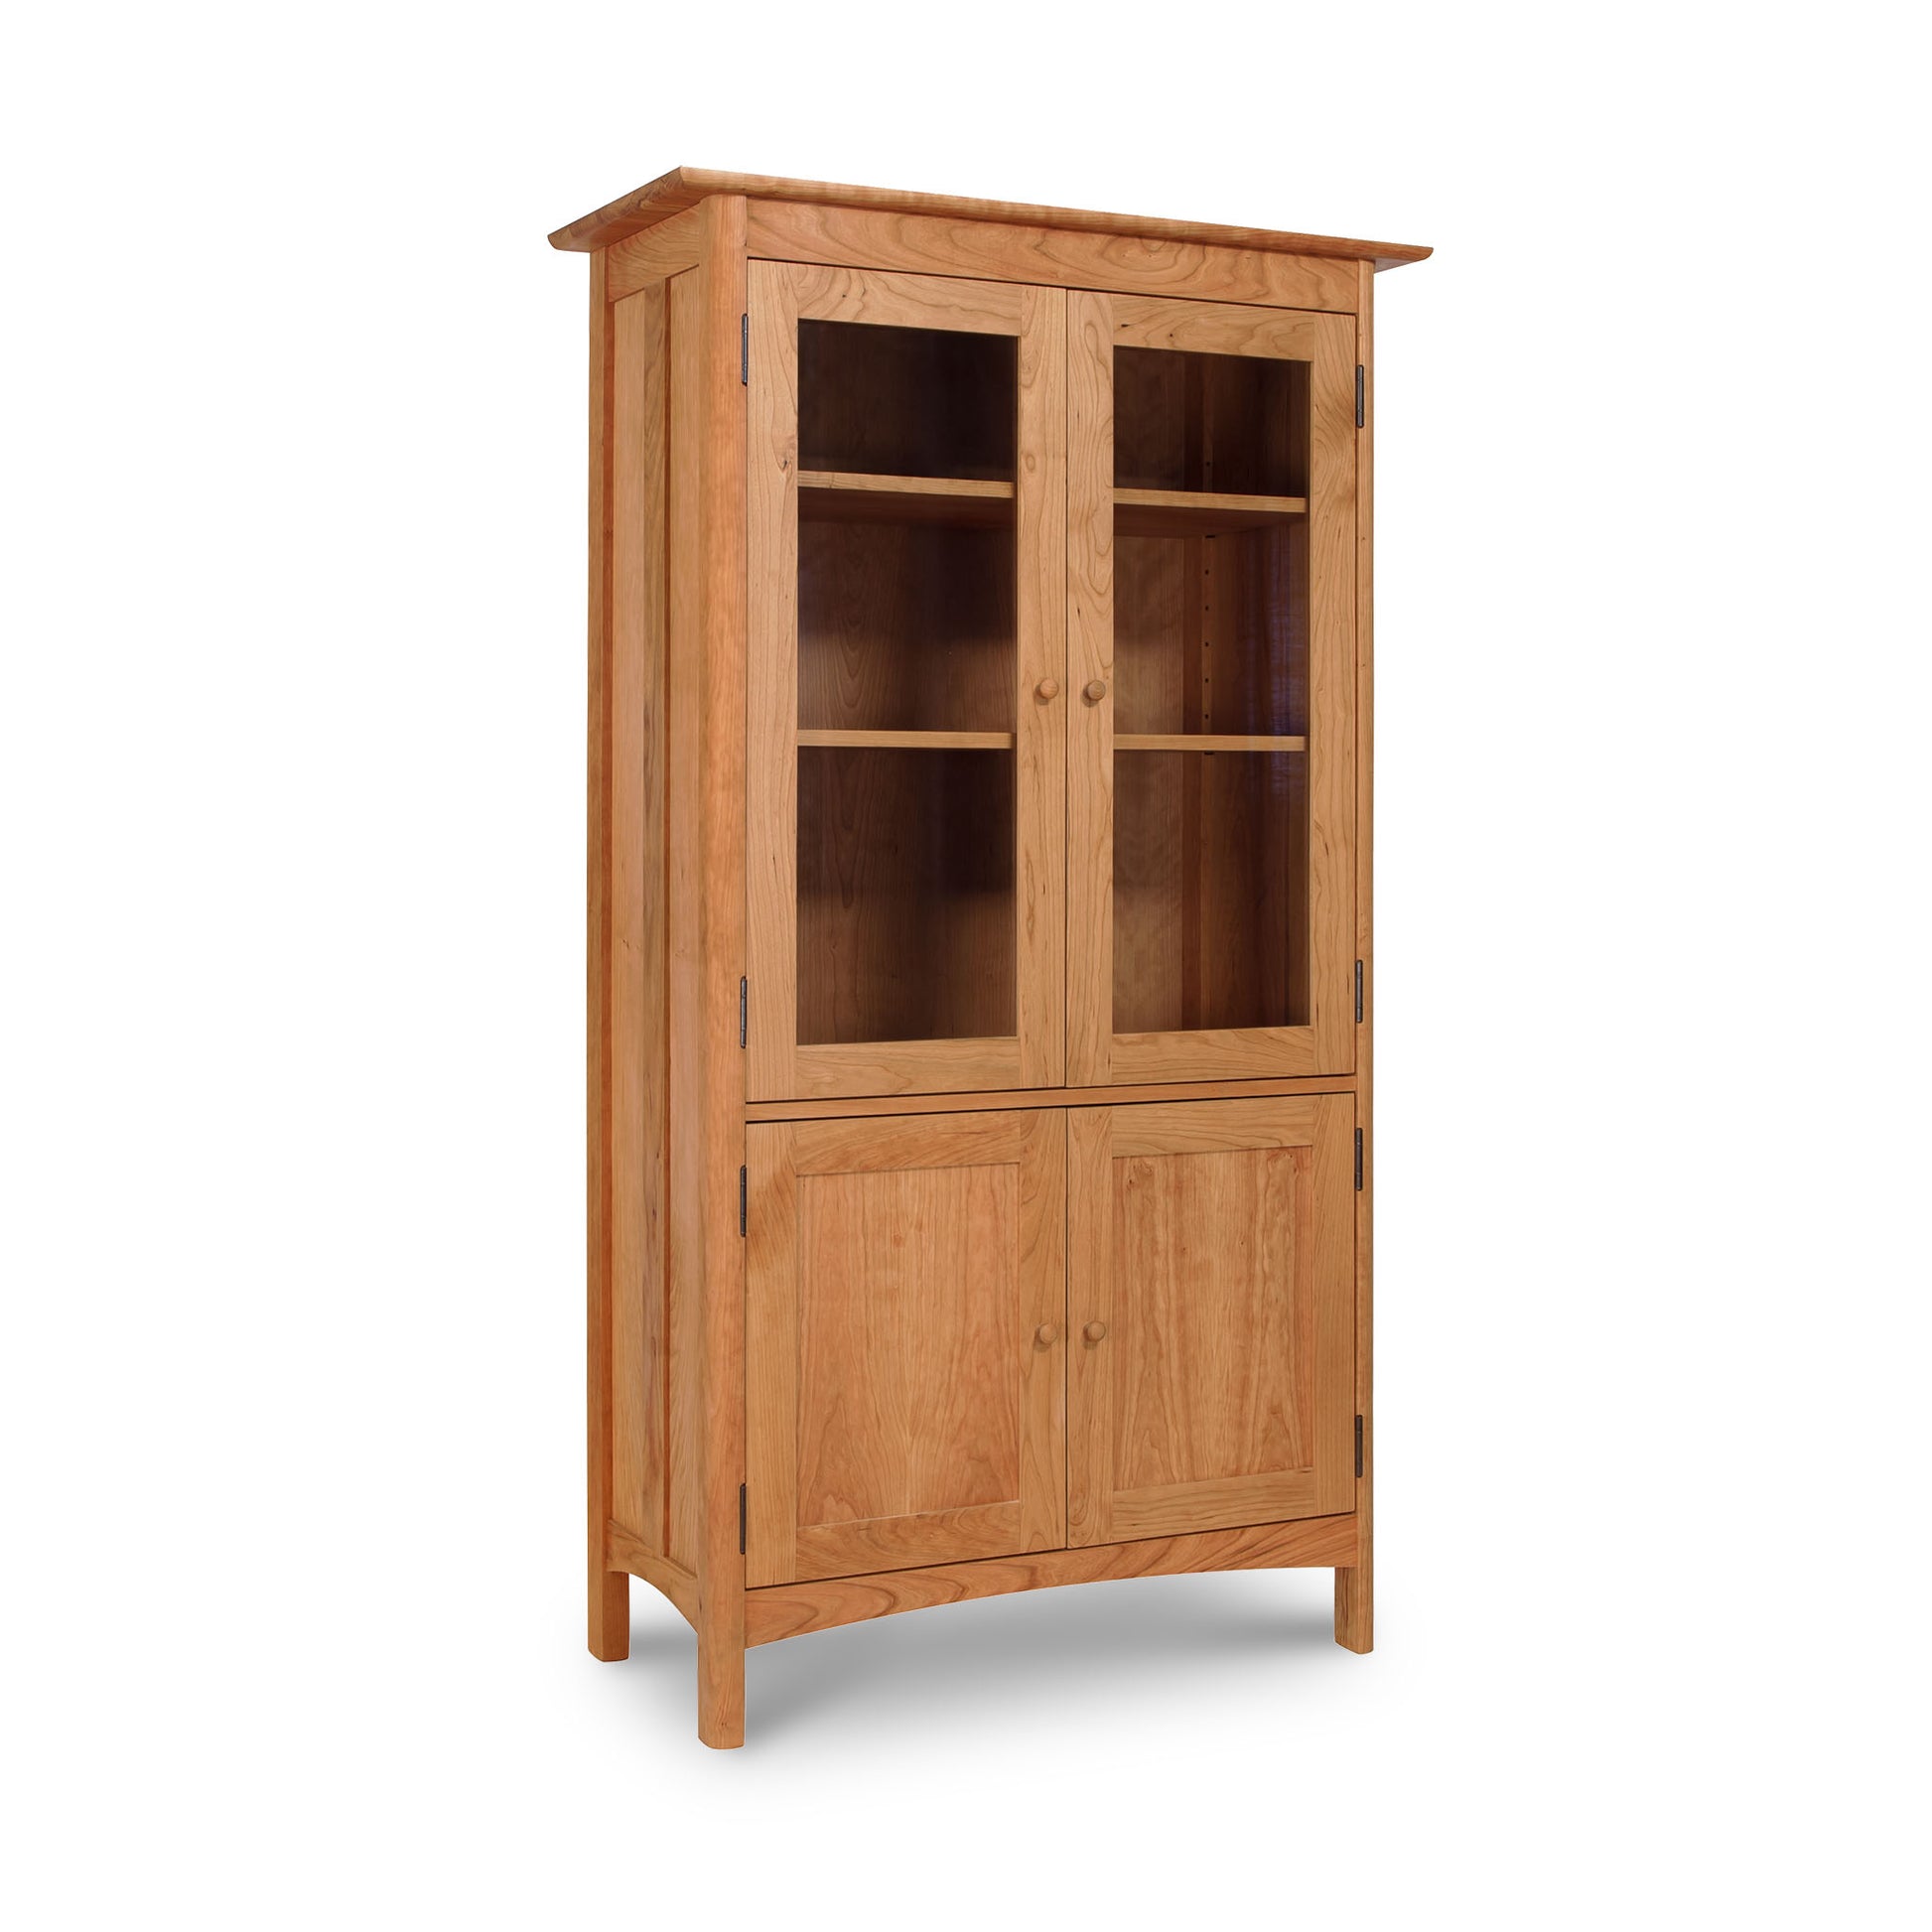 A wooden cabinet with glass doors.